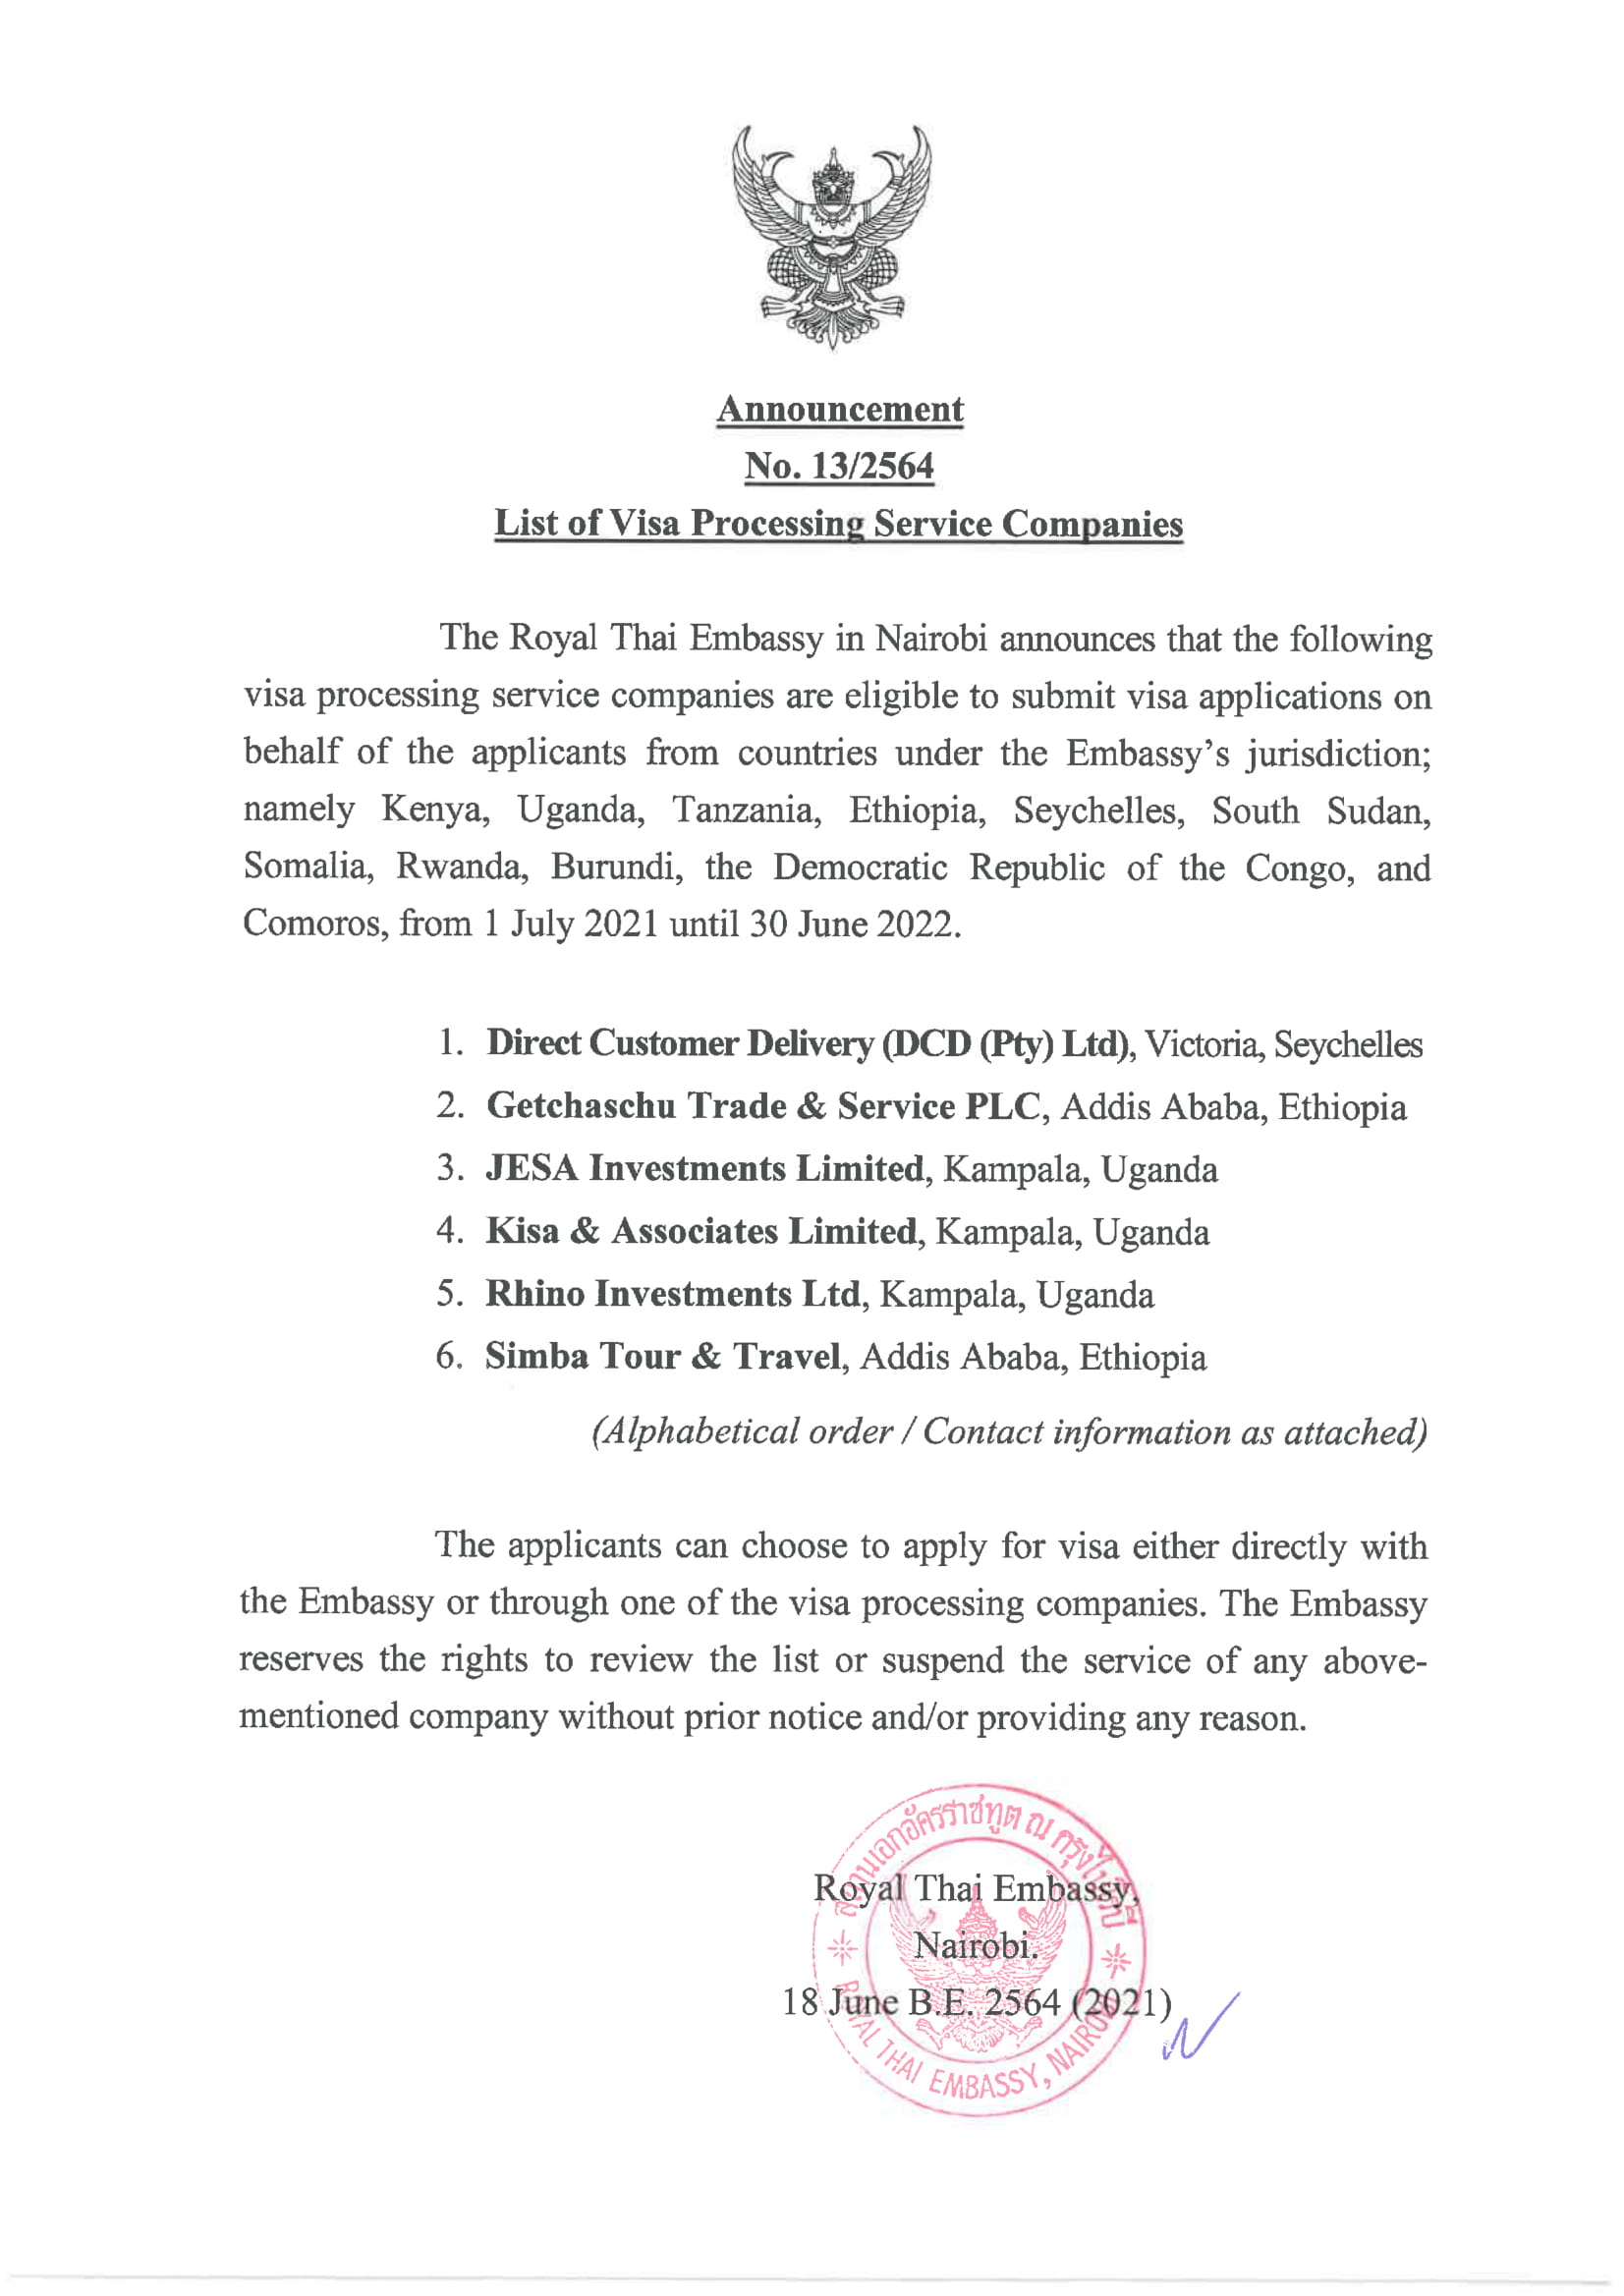 Announcement_no._13-2564_list_of_visa_processing_companany_final-1